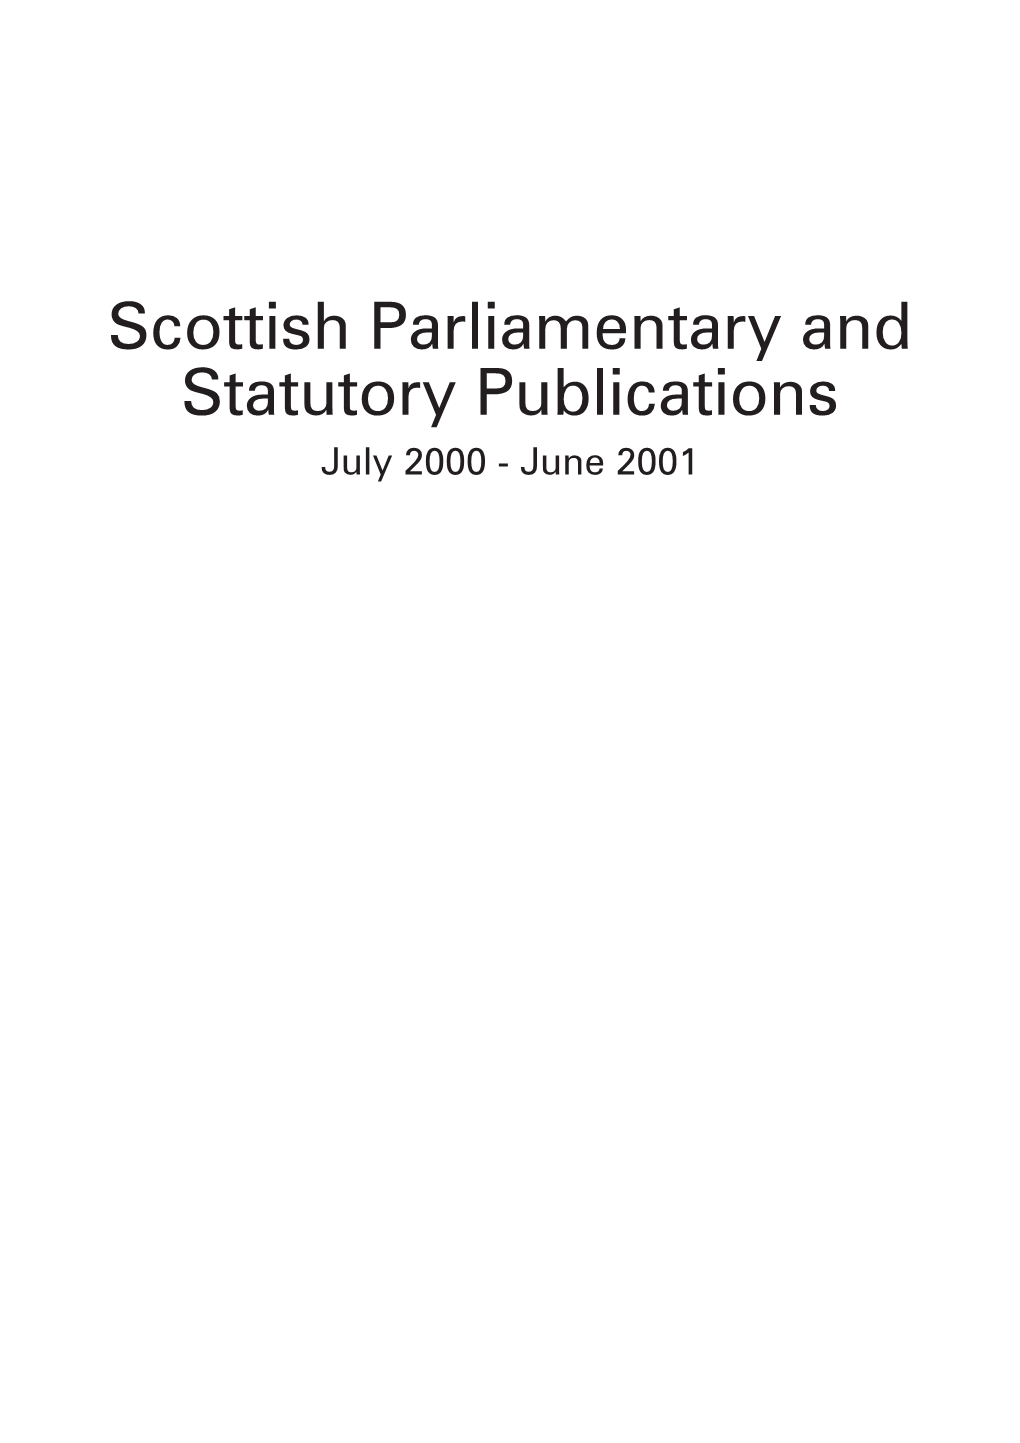 Scottish Parliamentary and Statutory Publications, July 2000 to June 2001